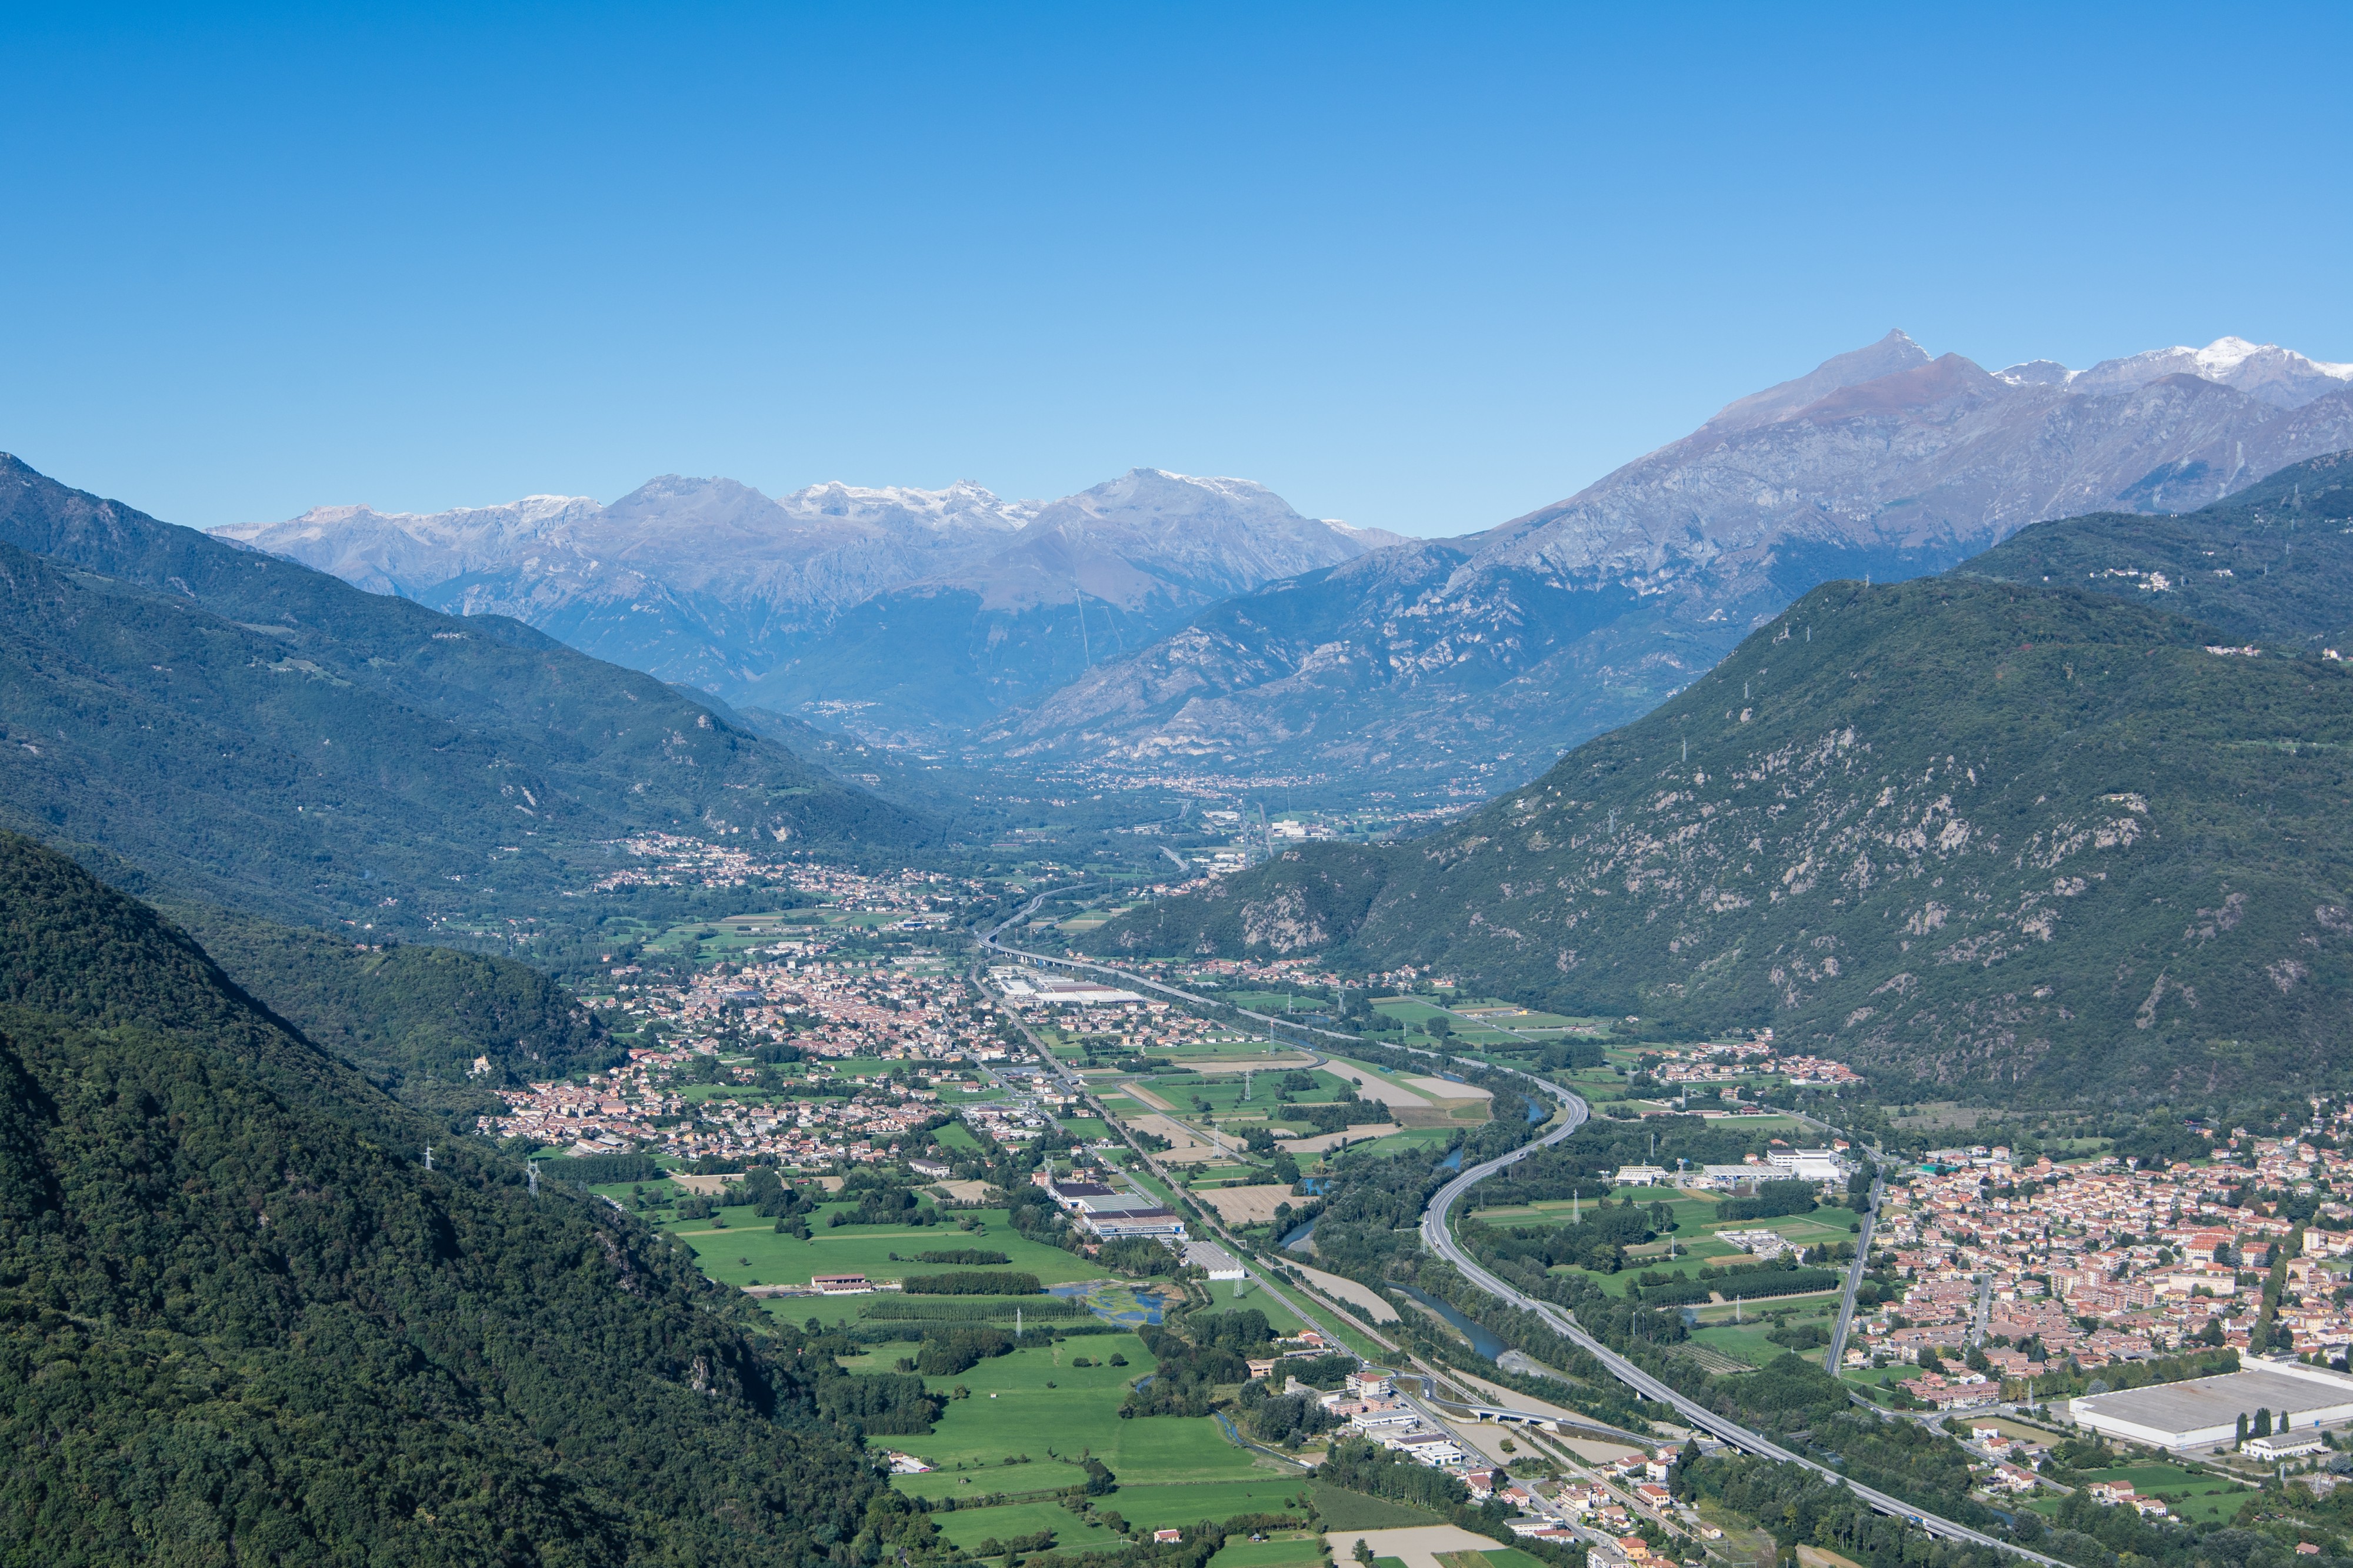 Susa valley from Sacra di San Michele